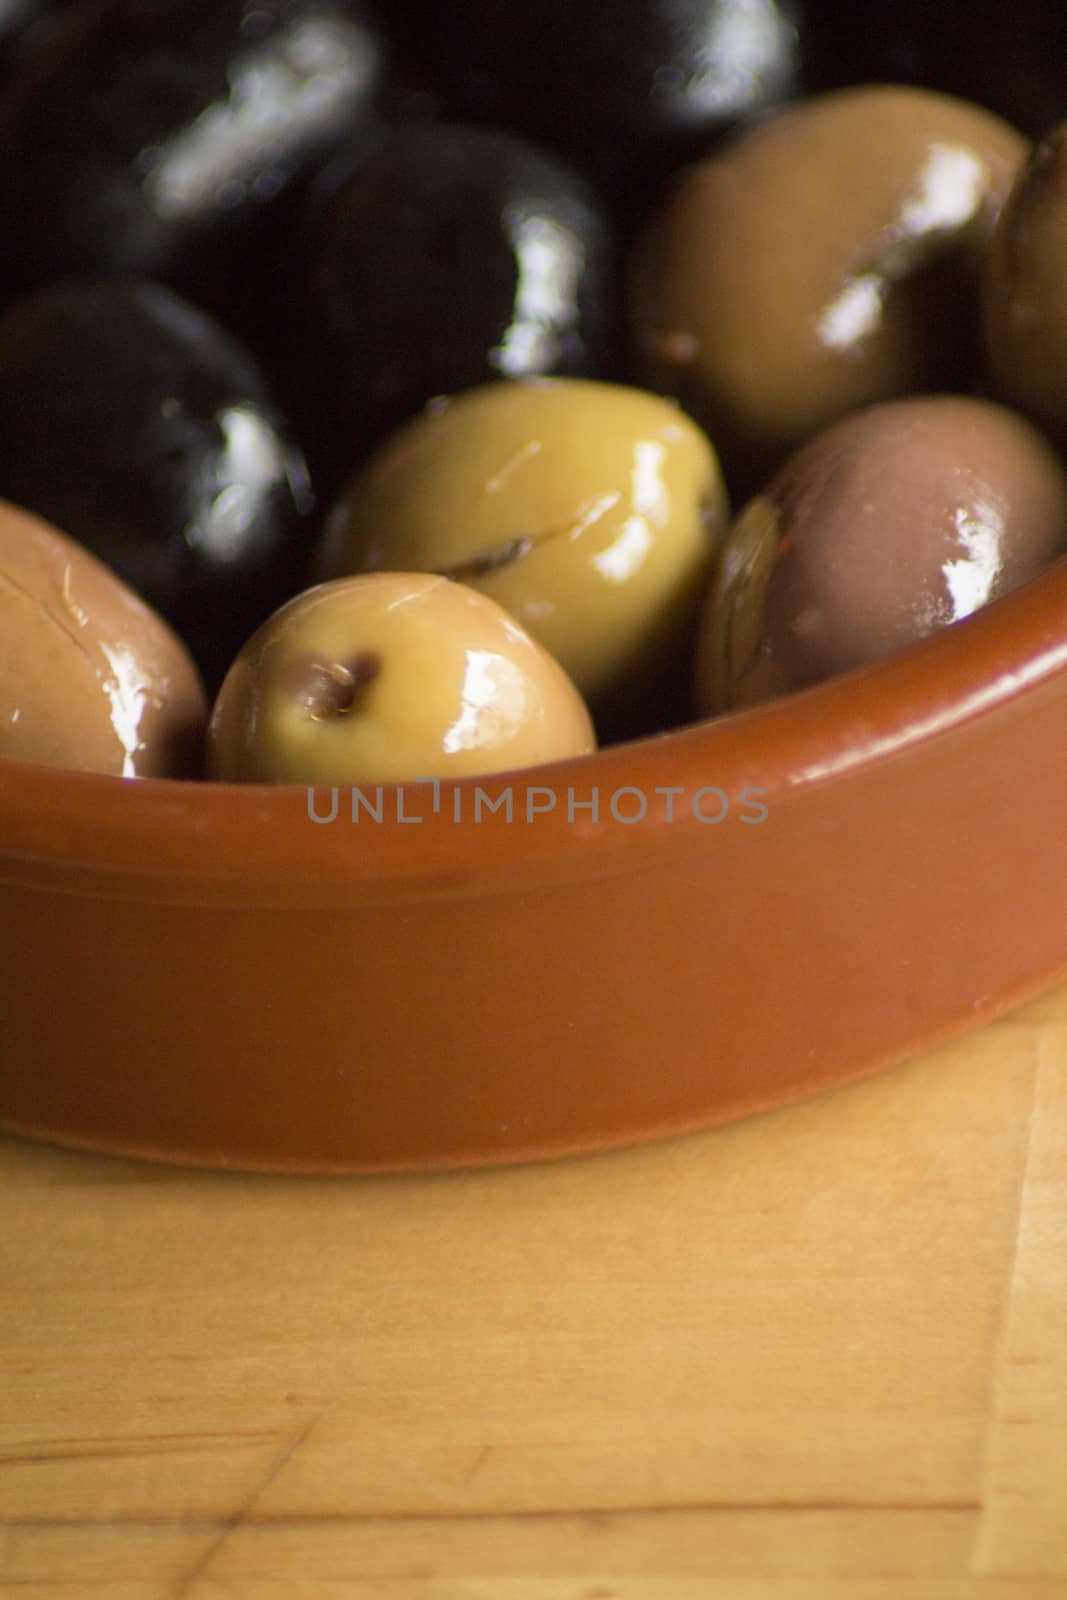 Spanish green and black olives in tapas dish by edwardolive